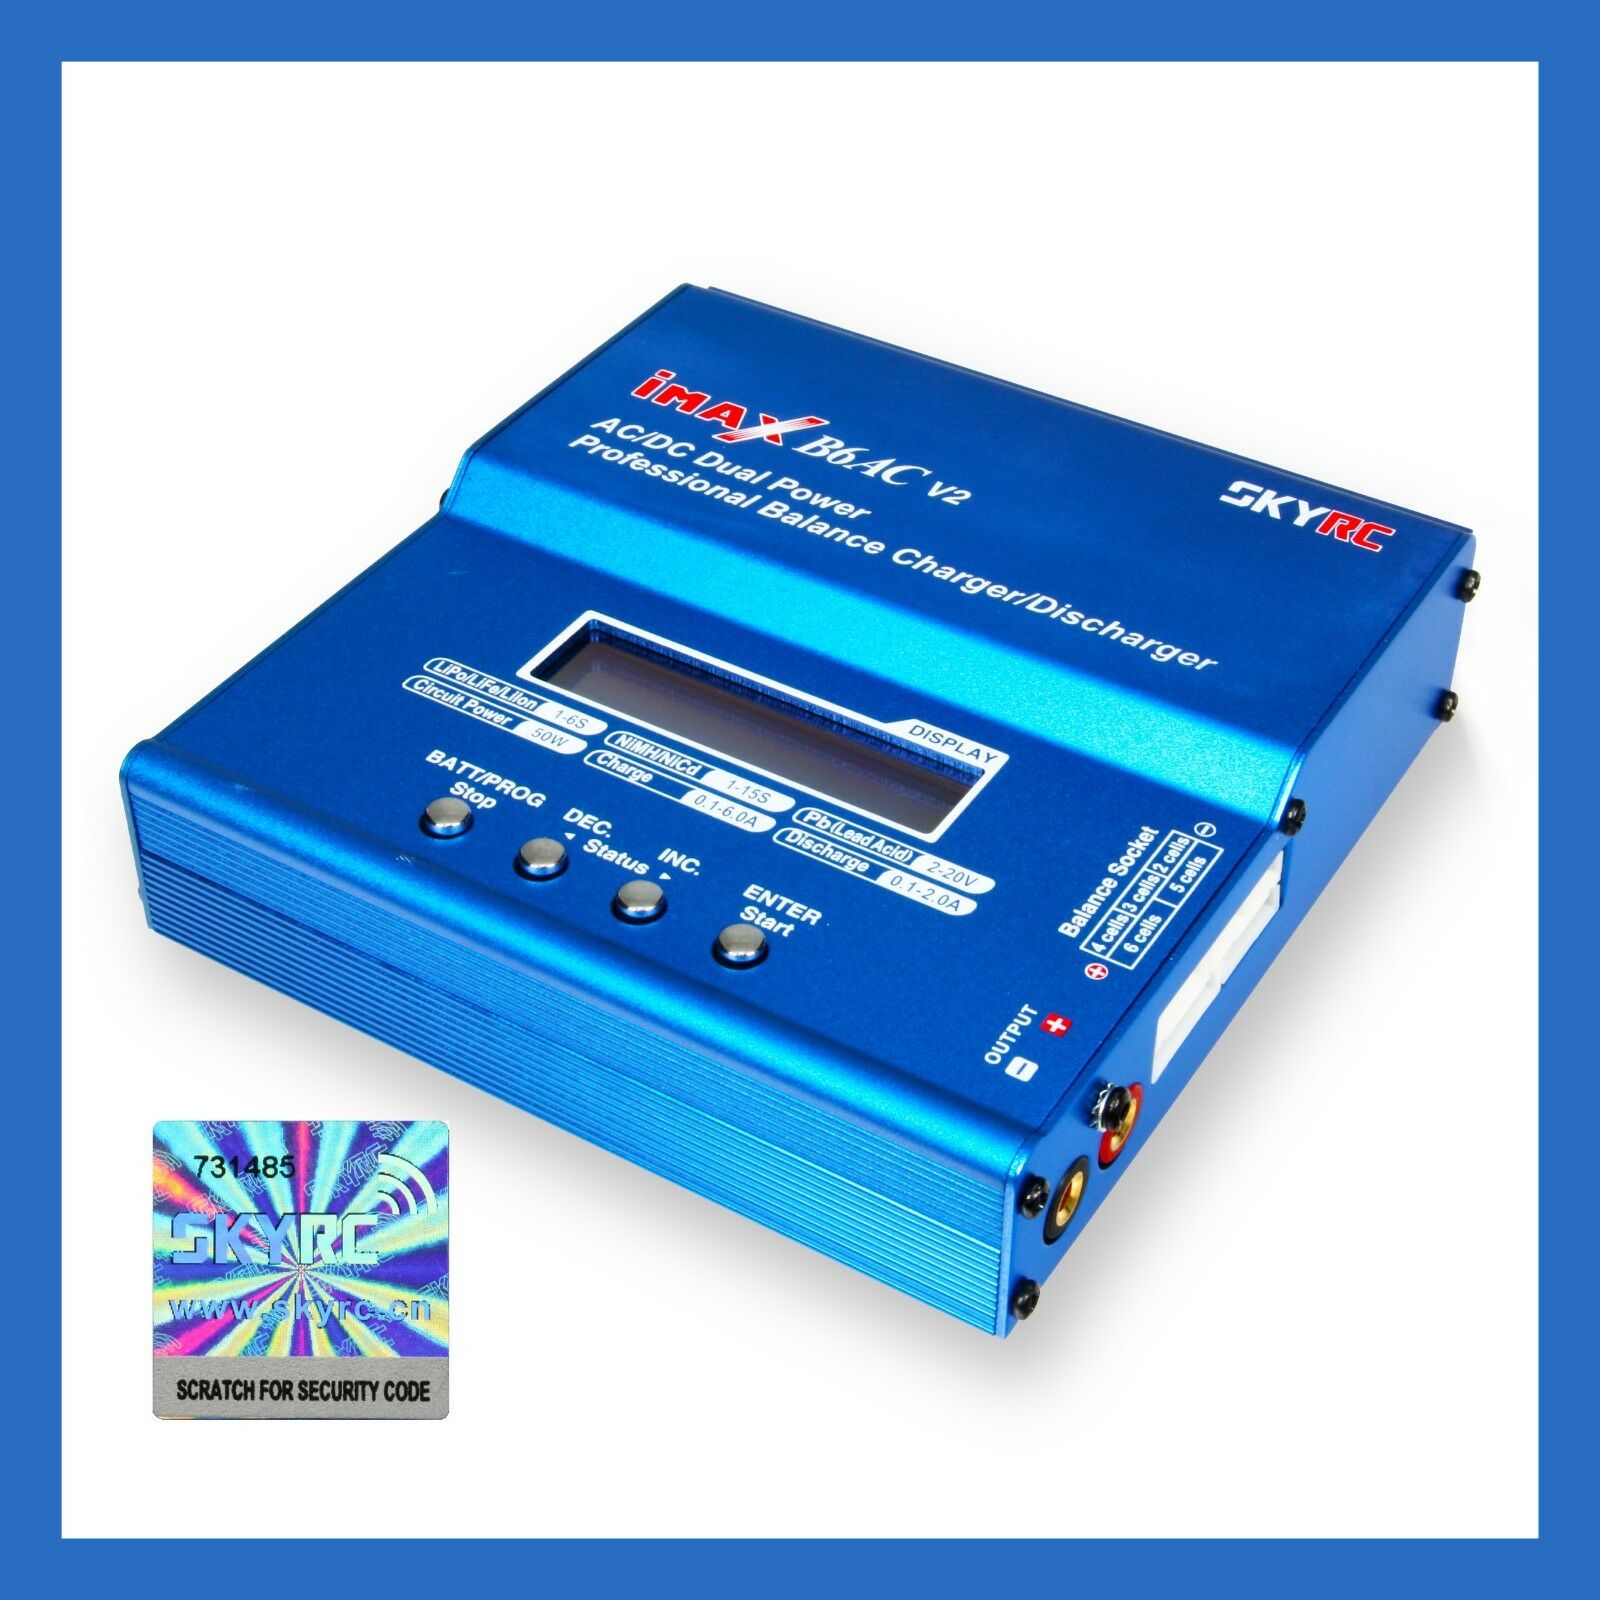 Authentic Skyrc Imax B6ac V2 Lipo Battery Balance Charger -authorized Us Dealer